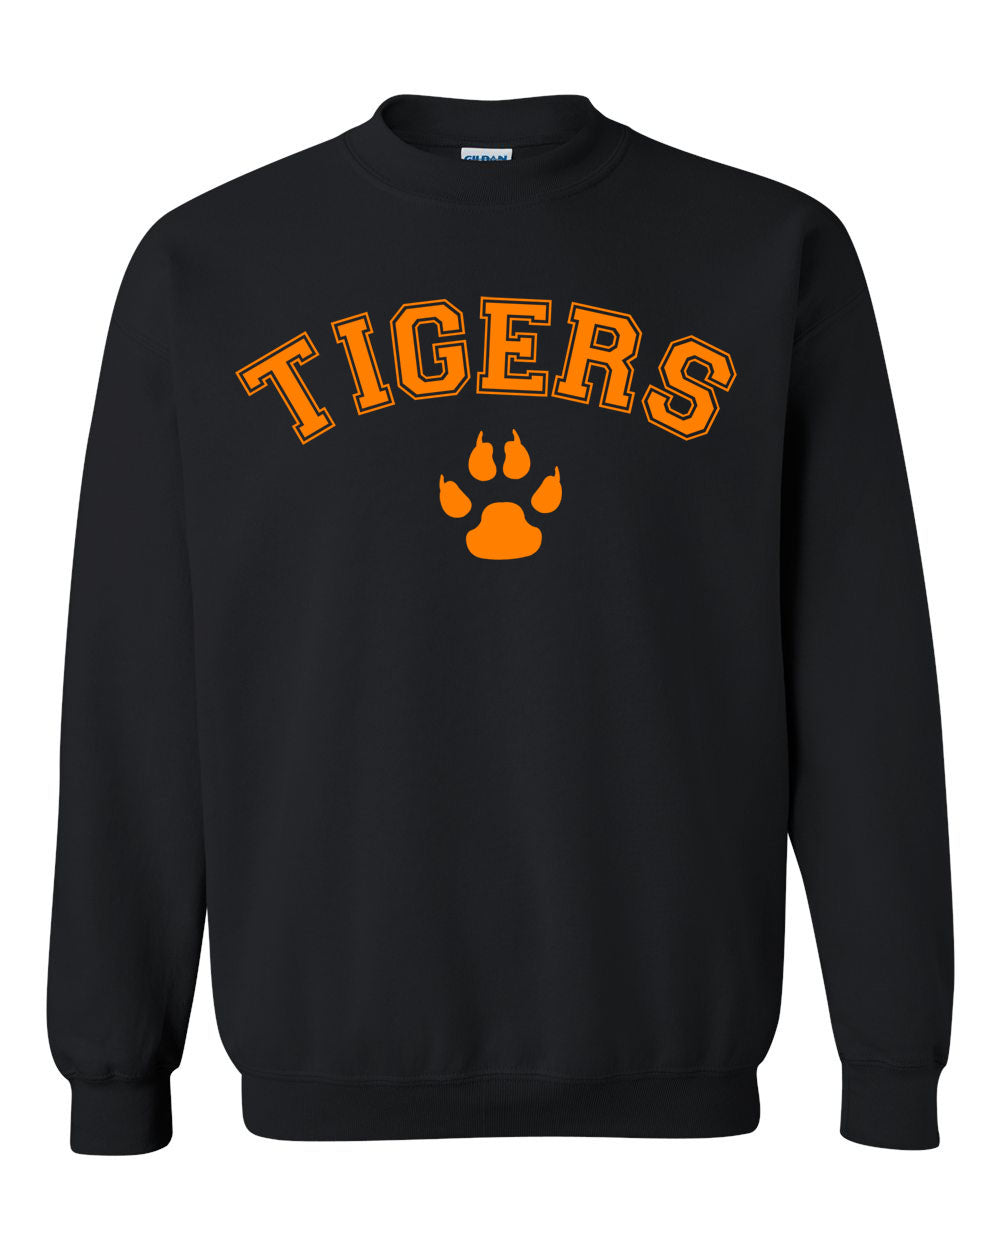 Tigers College style non hooded sweatshirt